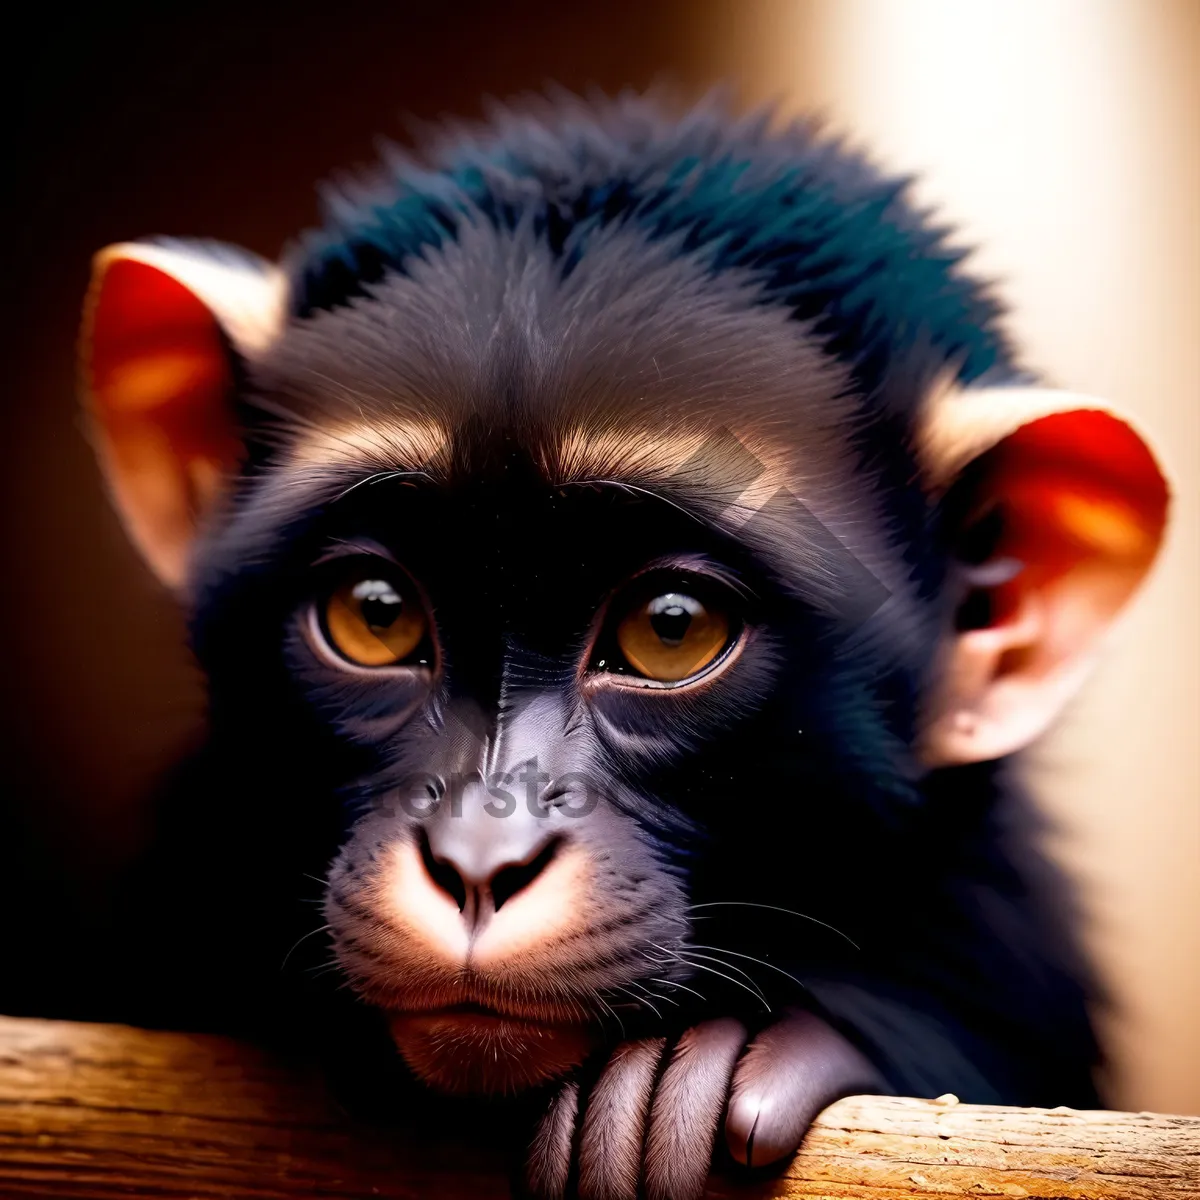 Picture of Adorable Baby Chimpanzee in the Wild